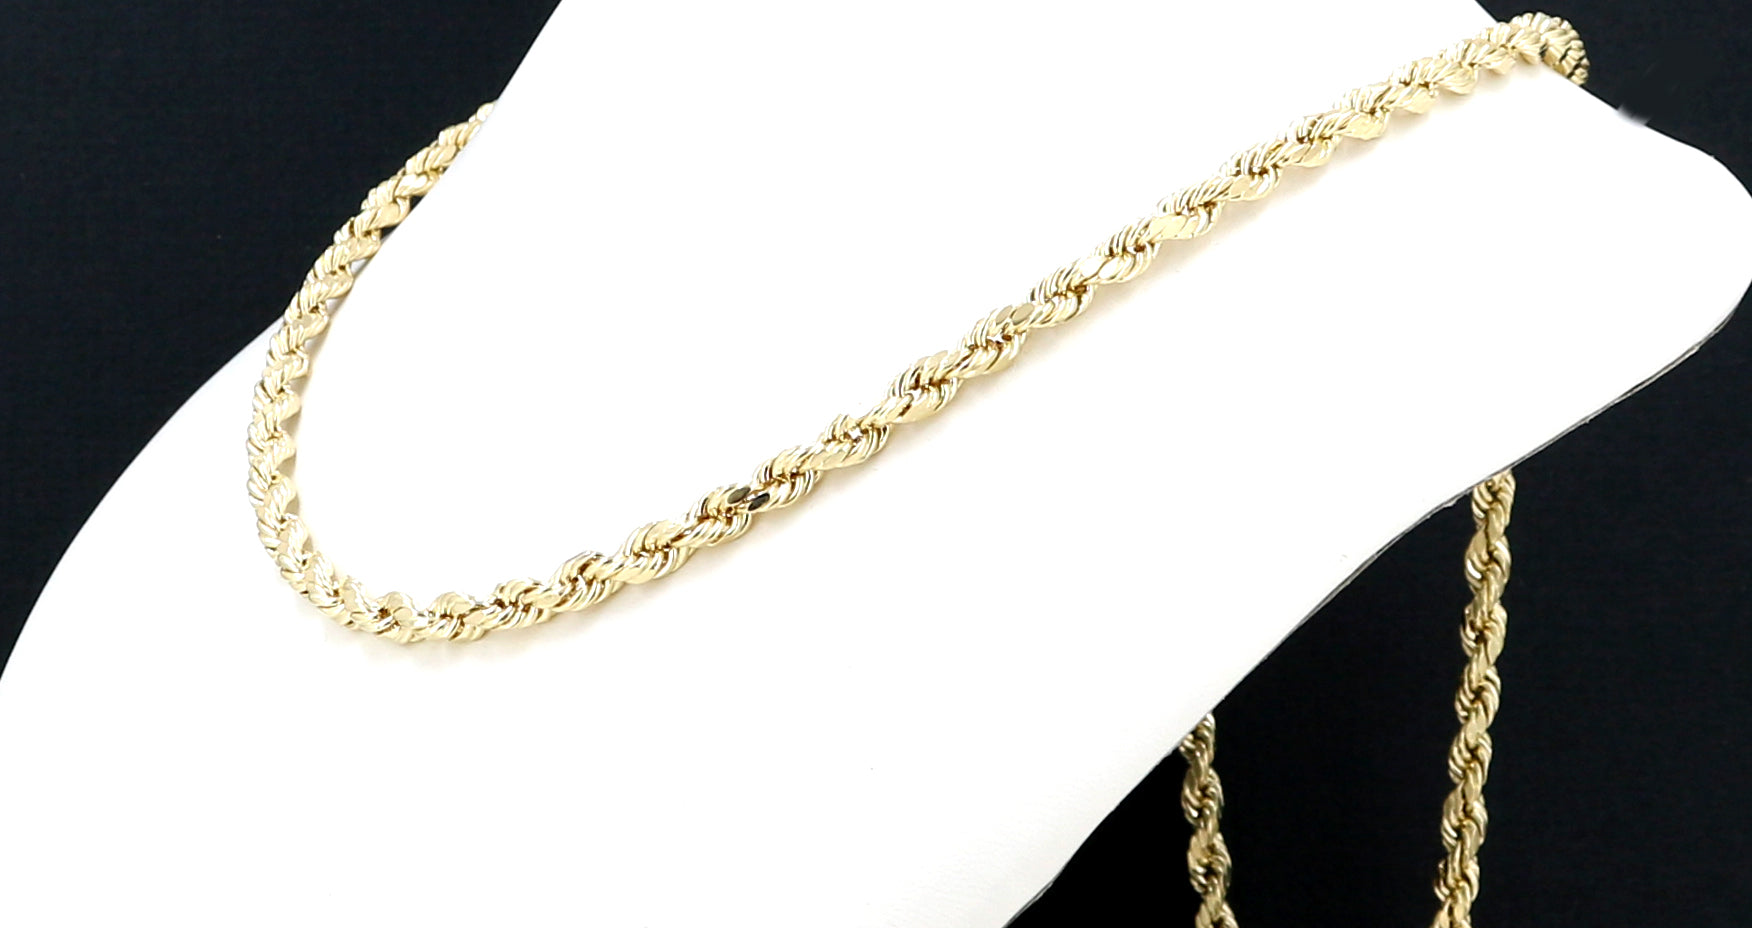 Nuragold 14k Yellow Gold 10mm Solid Rope Chain Diamond Cut Link Necklace,  Mens Jewelry Lobster Clasp 20